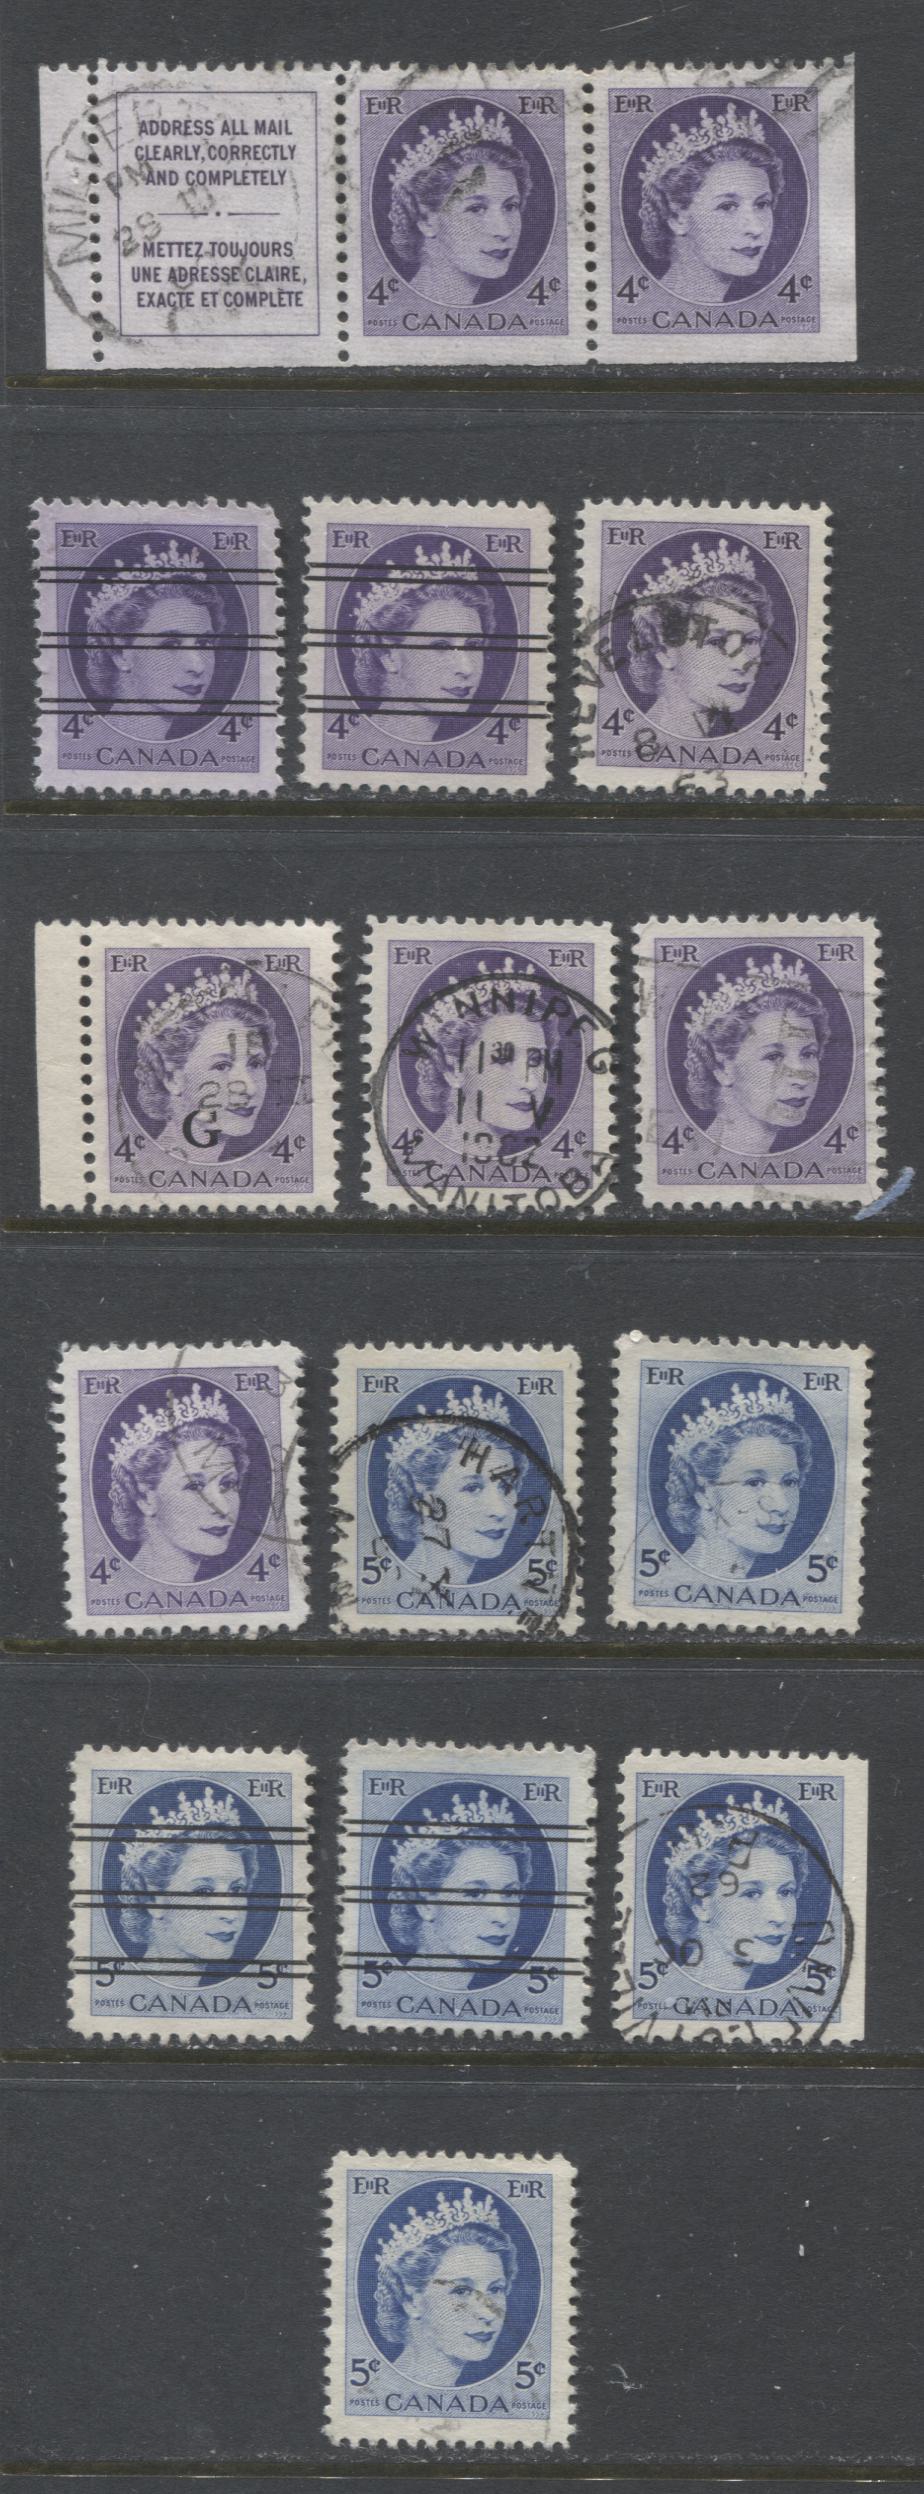 Lot 510A Canada #340i, bs, iii, p, xx, O43ii, 341p, i, xx, ii, bs 4c-5c Violet & Bright Blue Queen Elizabeth II, 1954-1962  Wilding Issue, 13 VF Used Singles & 1 Booklet Strip of 3, Precancels, Booklet Singles, Cello-Paq Singles Fluorescent & HB Papers,